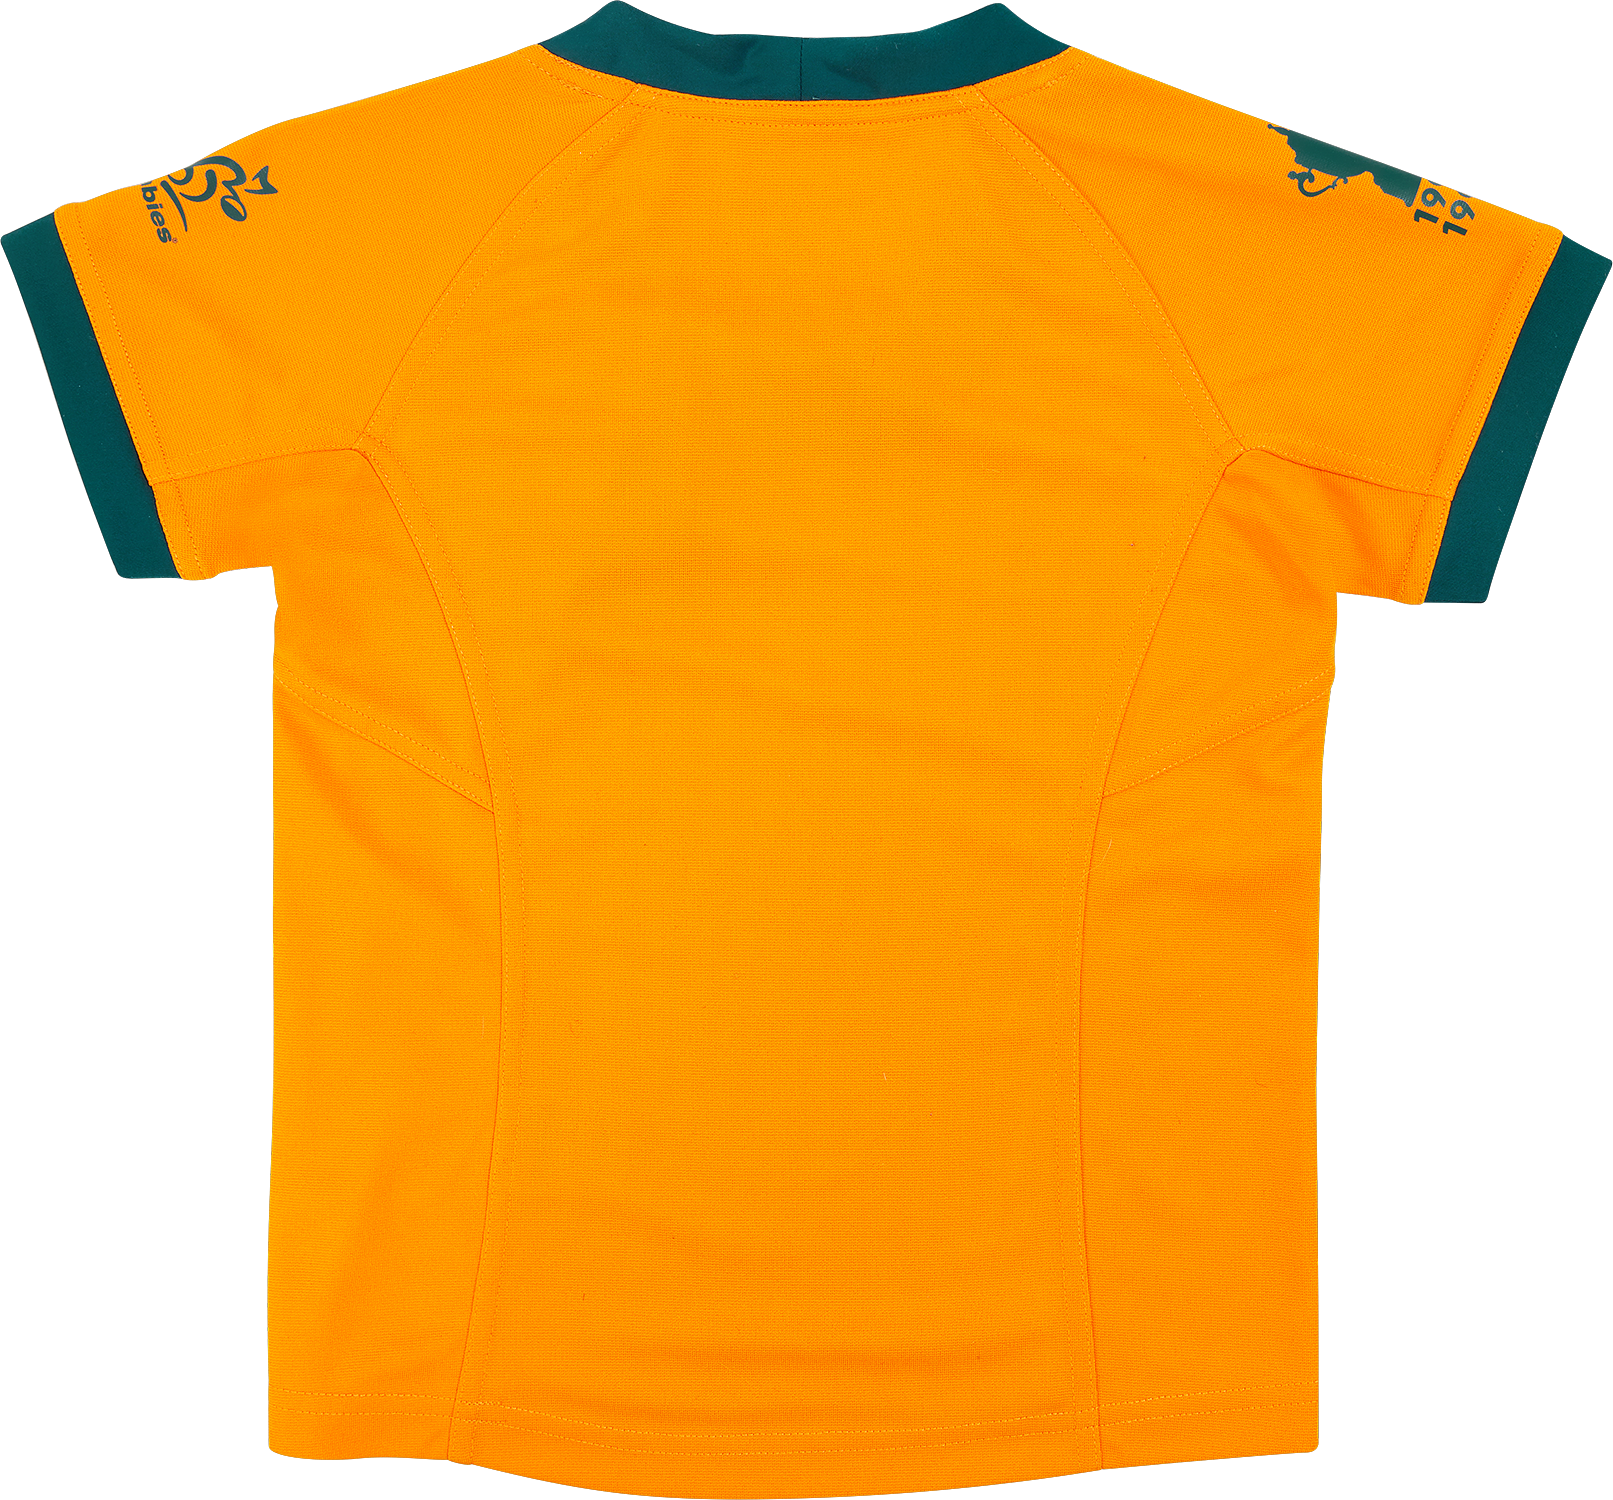 Wallabies RWC Rep Home Jersey Infant 2023 - The Rugby Shop Darwin